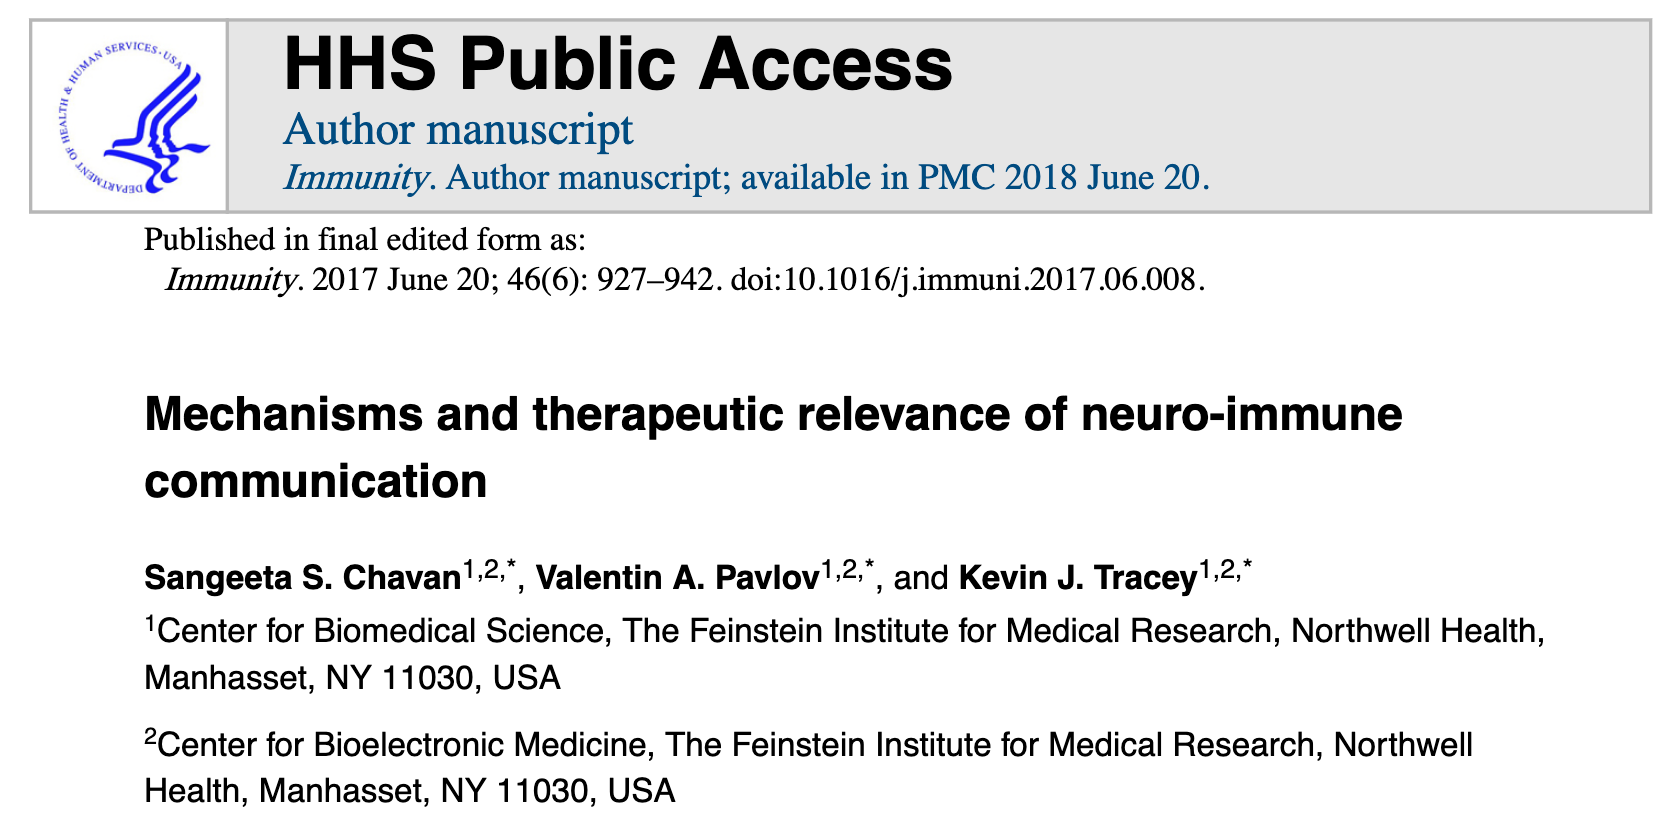 MECHANISMS AND THERAPEUTIC RELEVANCE OF NEURO IMMUNE COMMUNICATION